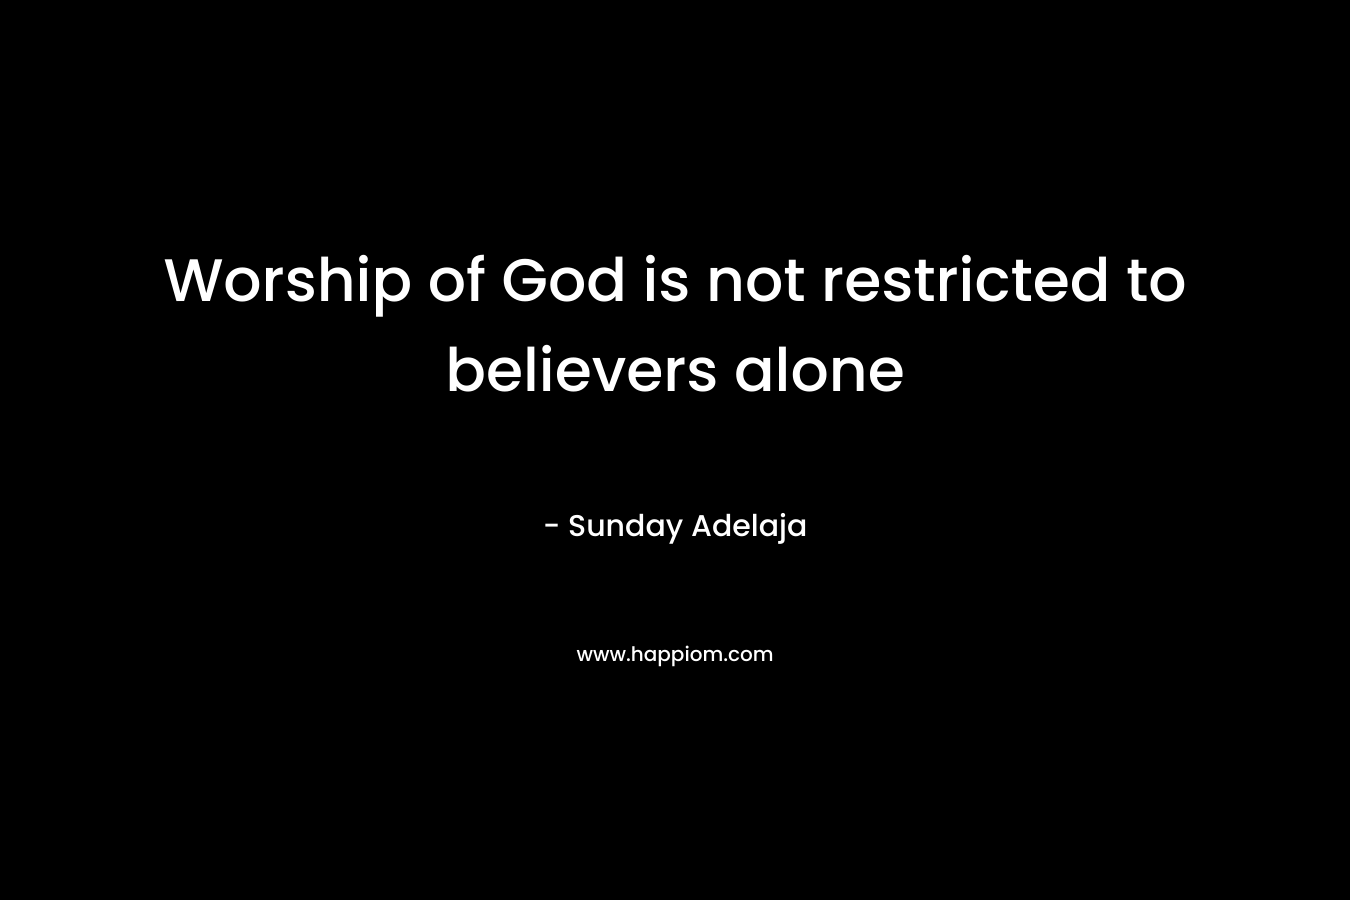 Worship of God is not restricted to believers alone